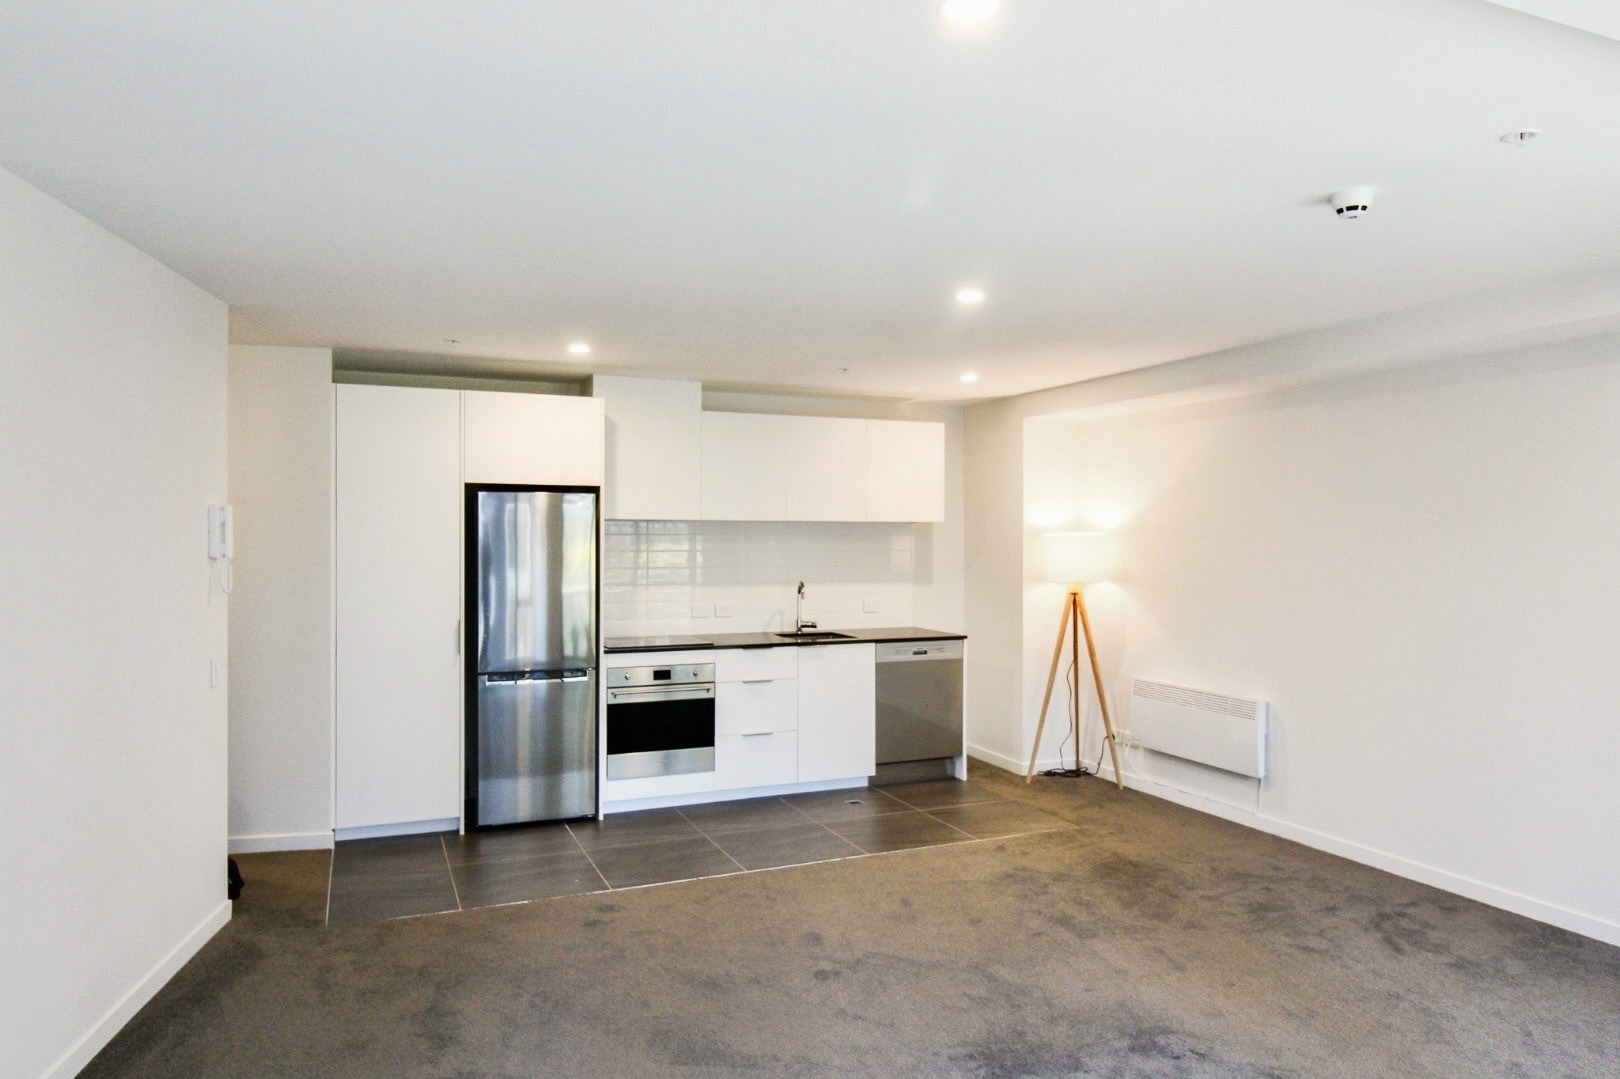 Real Estate For Rent Houses & Apartments : 1 Bedroom apartment in Pinnacle Apartments, Wellington